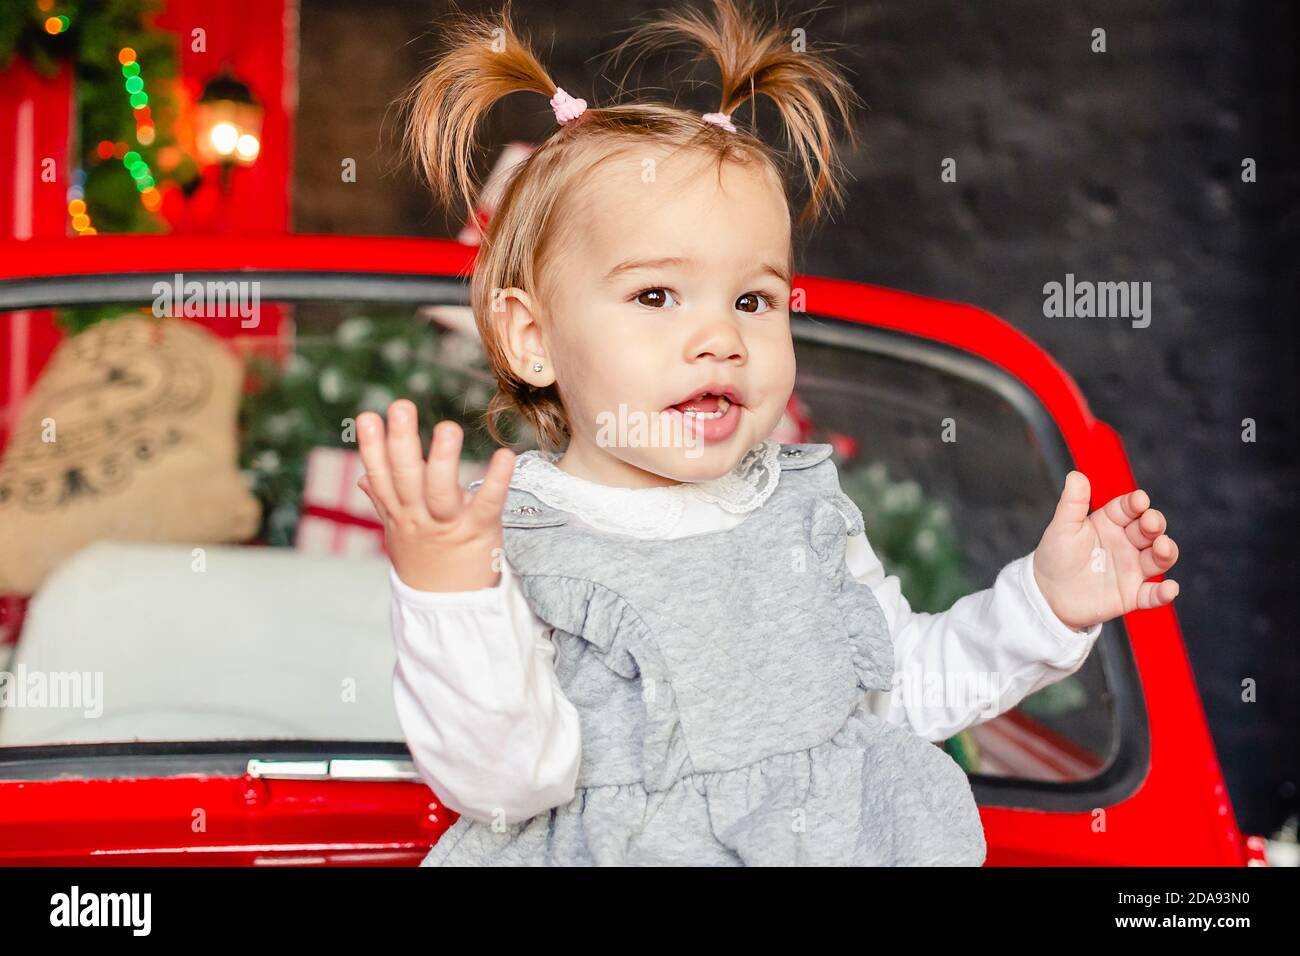 Joyful baby sitting on red Christmas car in the living room at home. Merry Christmas and Happy Holidays! Stock Photo